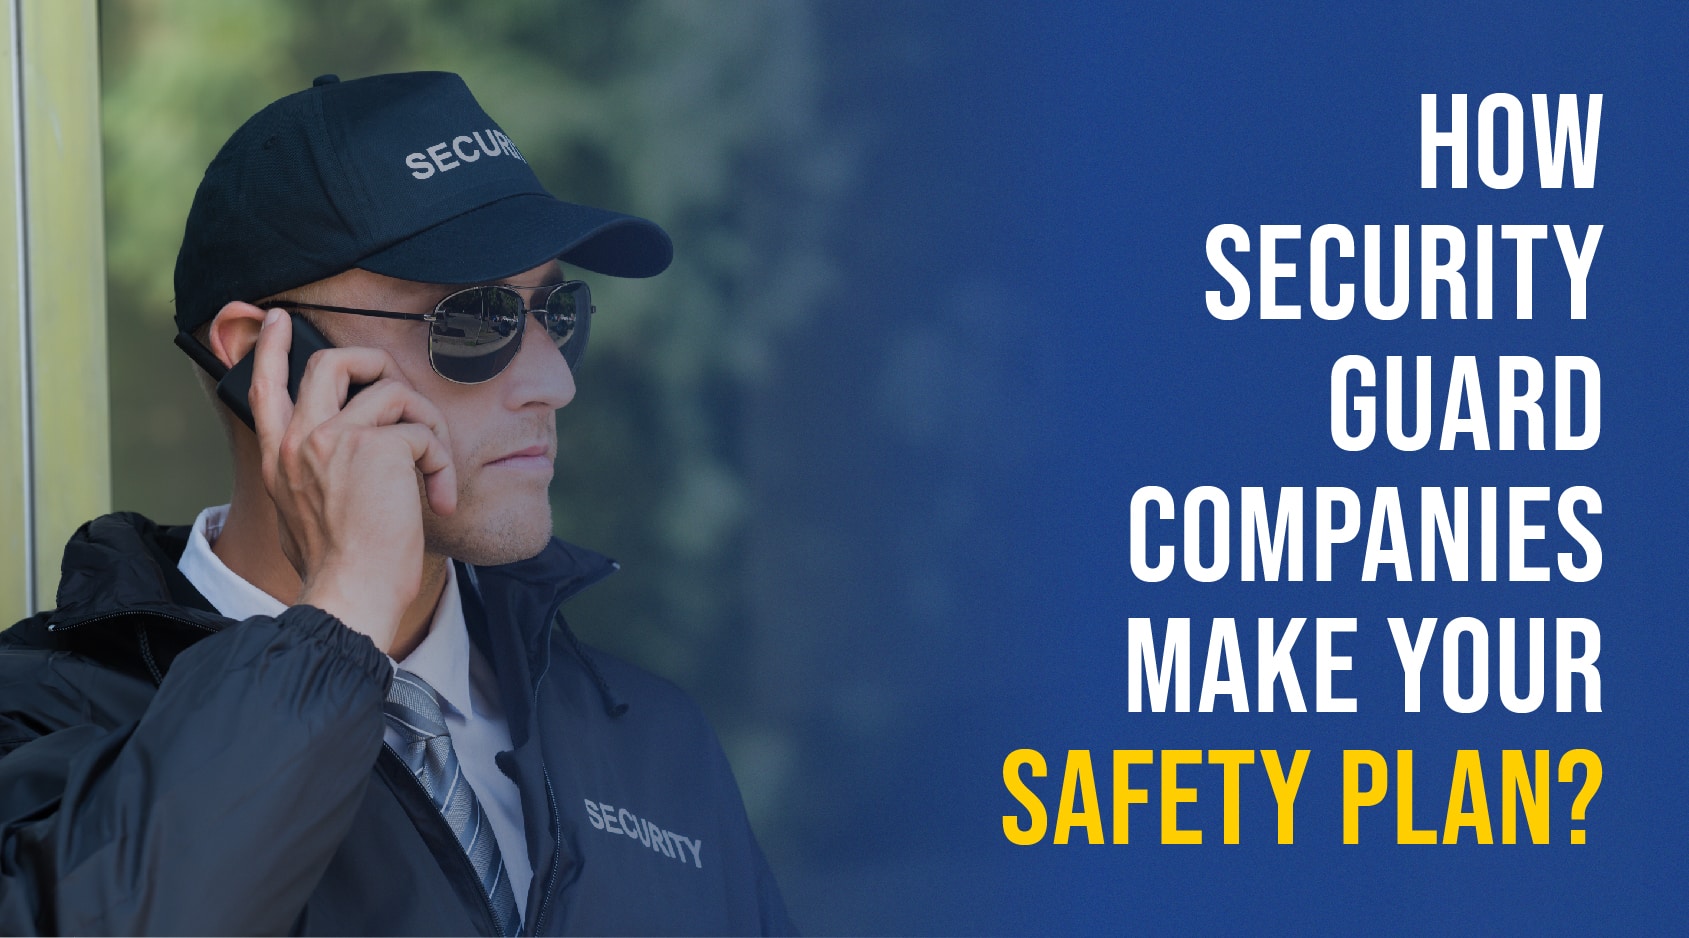 How security guard compaines make your safety plan